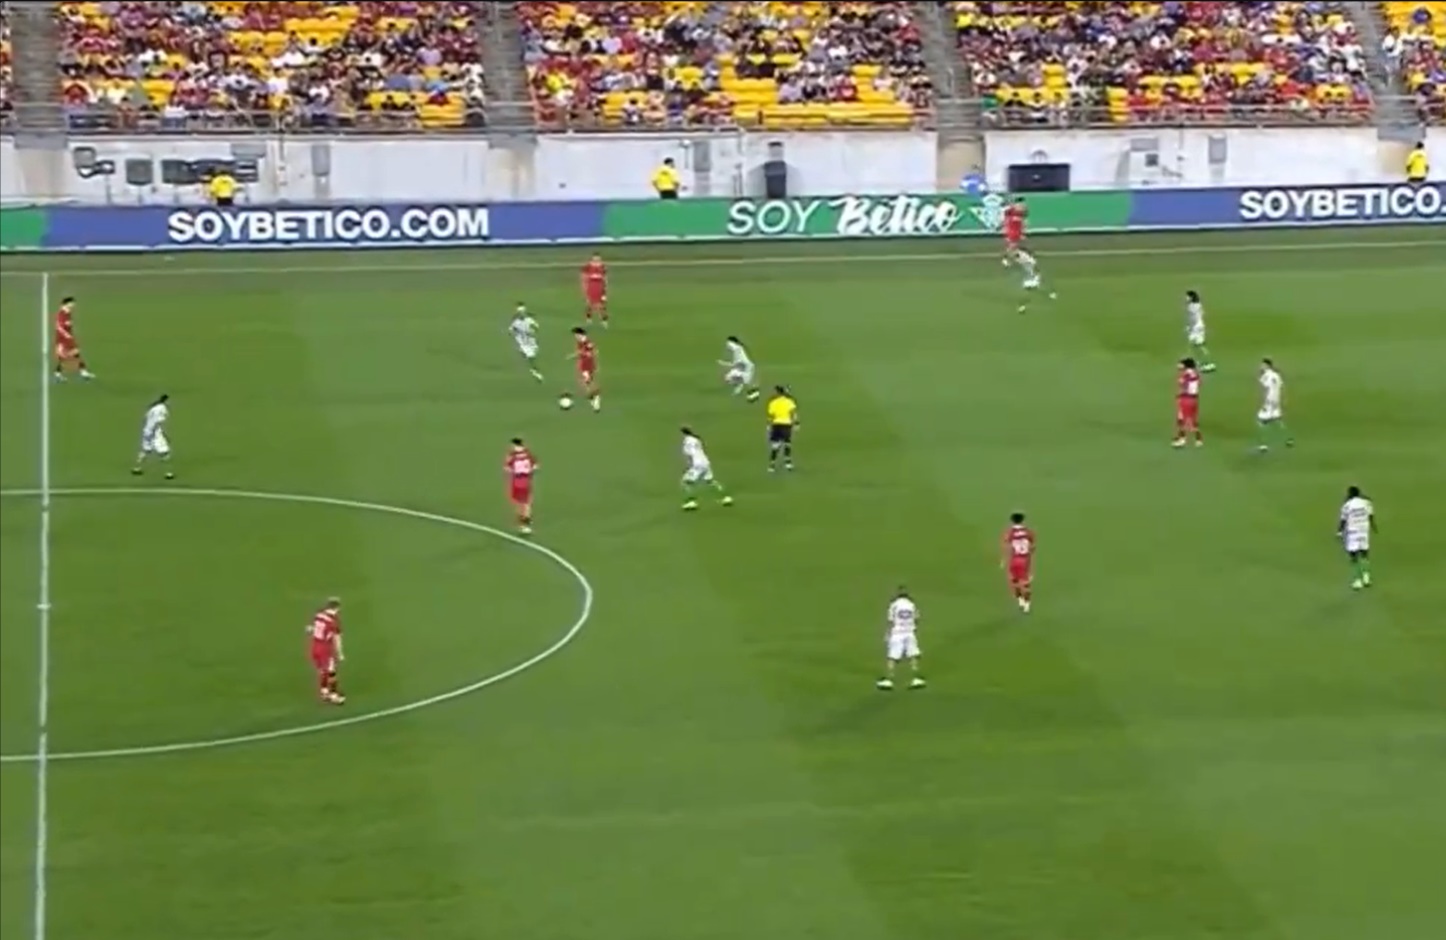 (Video) Liverpool wonderkid who won 5 duels simply oozed class in friendly win over Real Betis